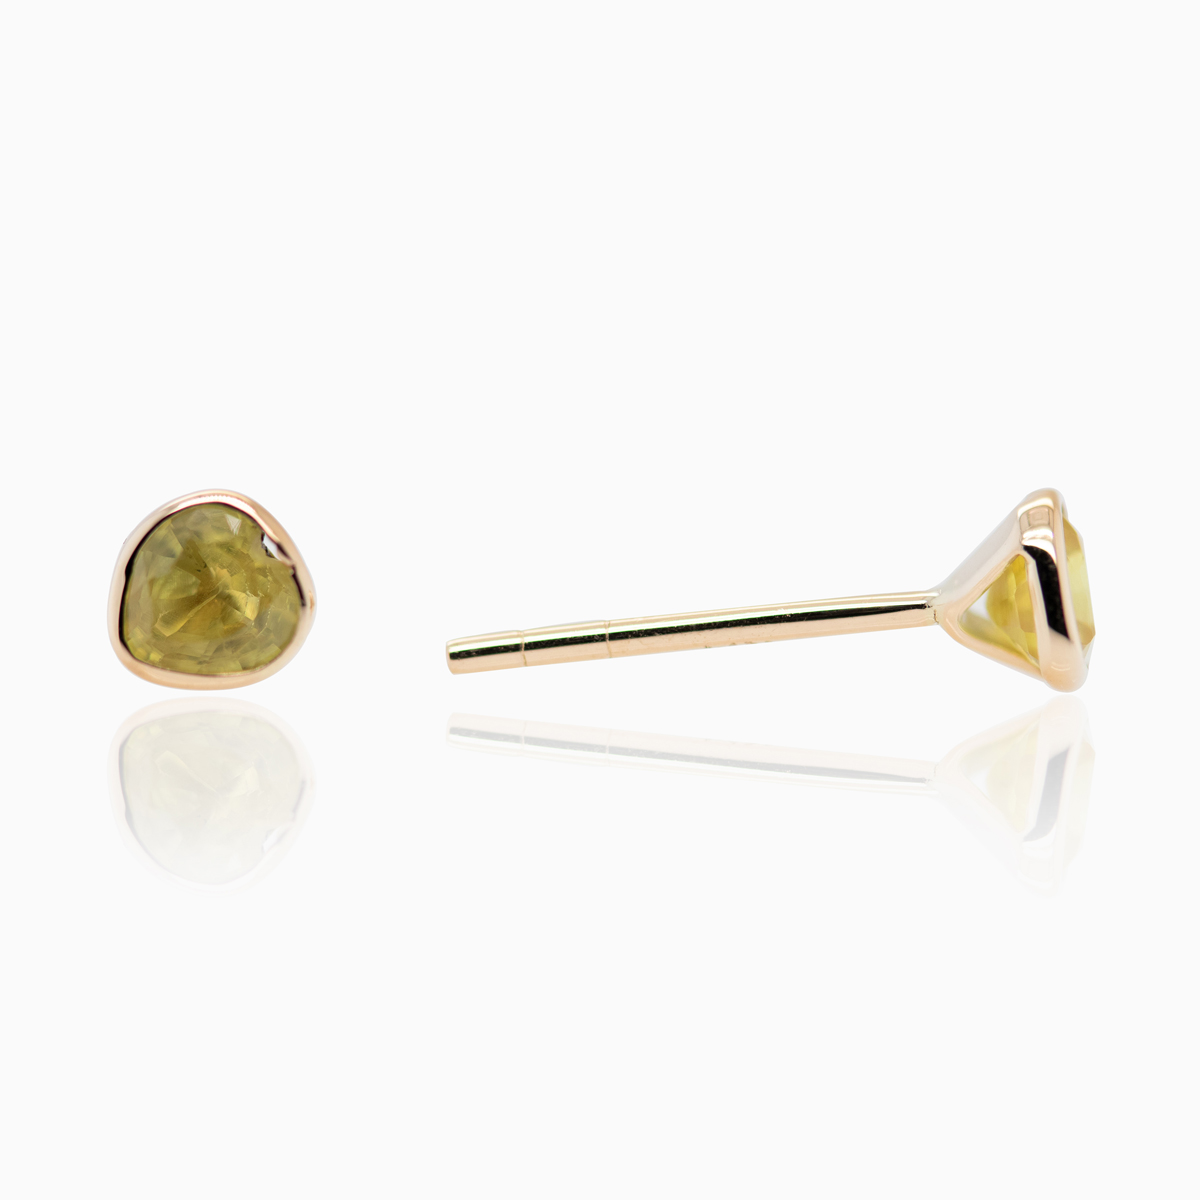 Natural Yellow Sapphire Stud Earrings, 14k Yellow Gold